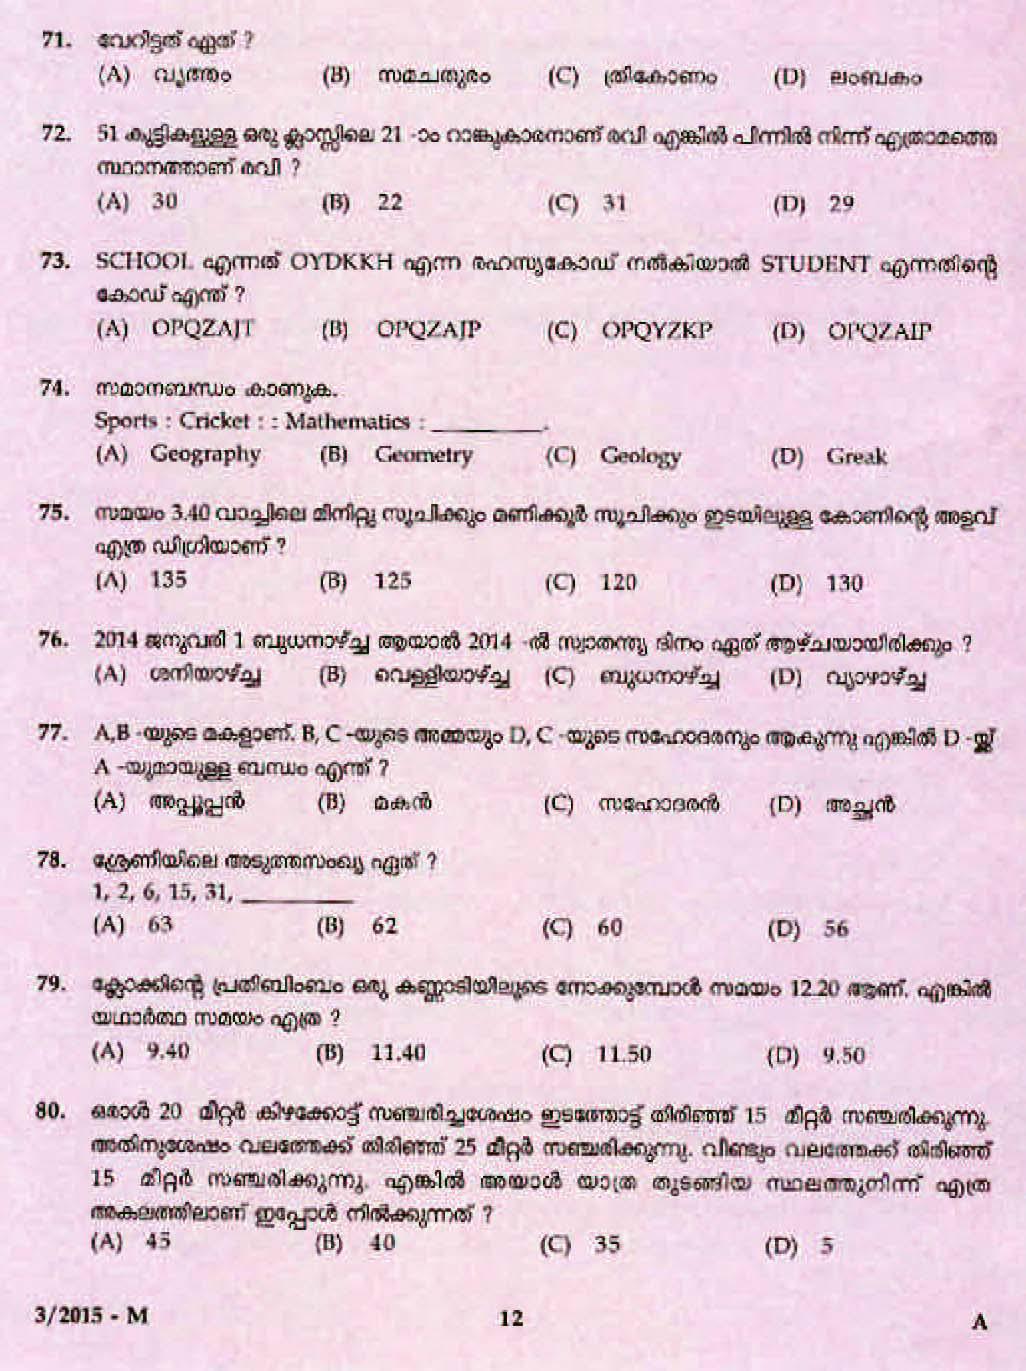 LD Clerk Thrissur District Question Paper Malayalam 2015 Paper Code 32015 M 10